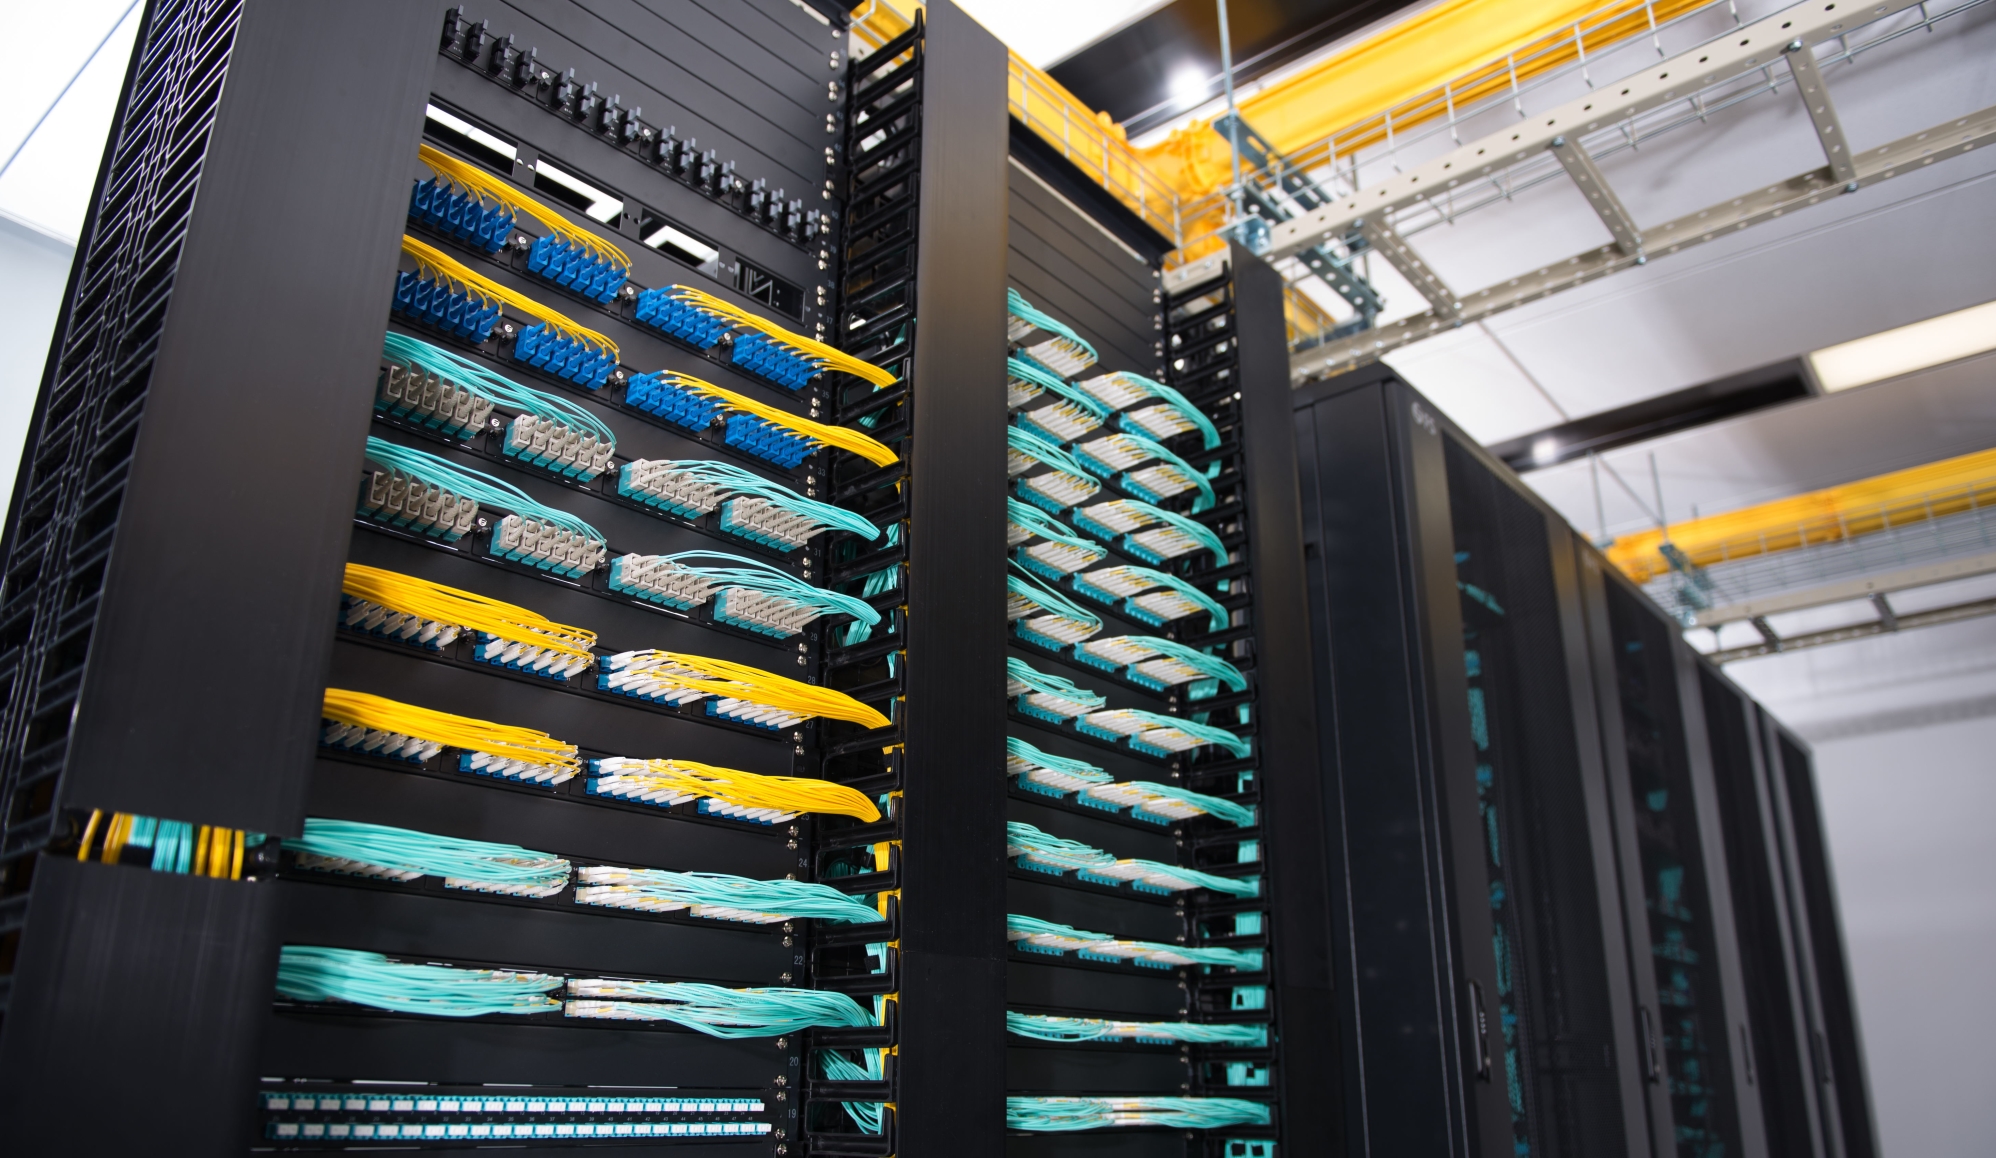 what is structured cabling